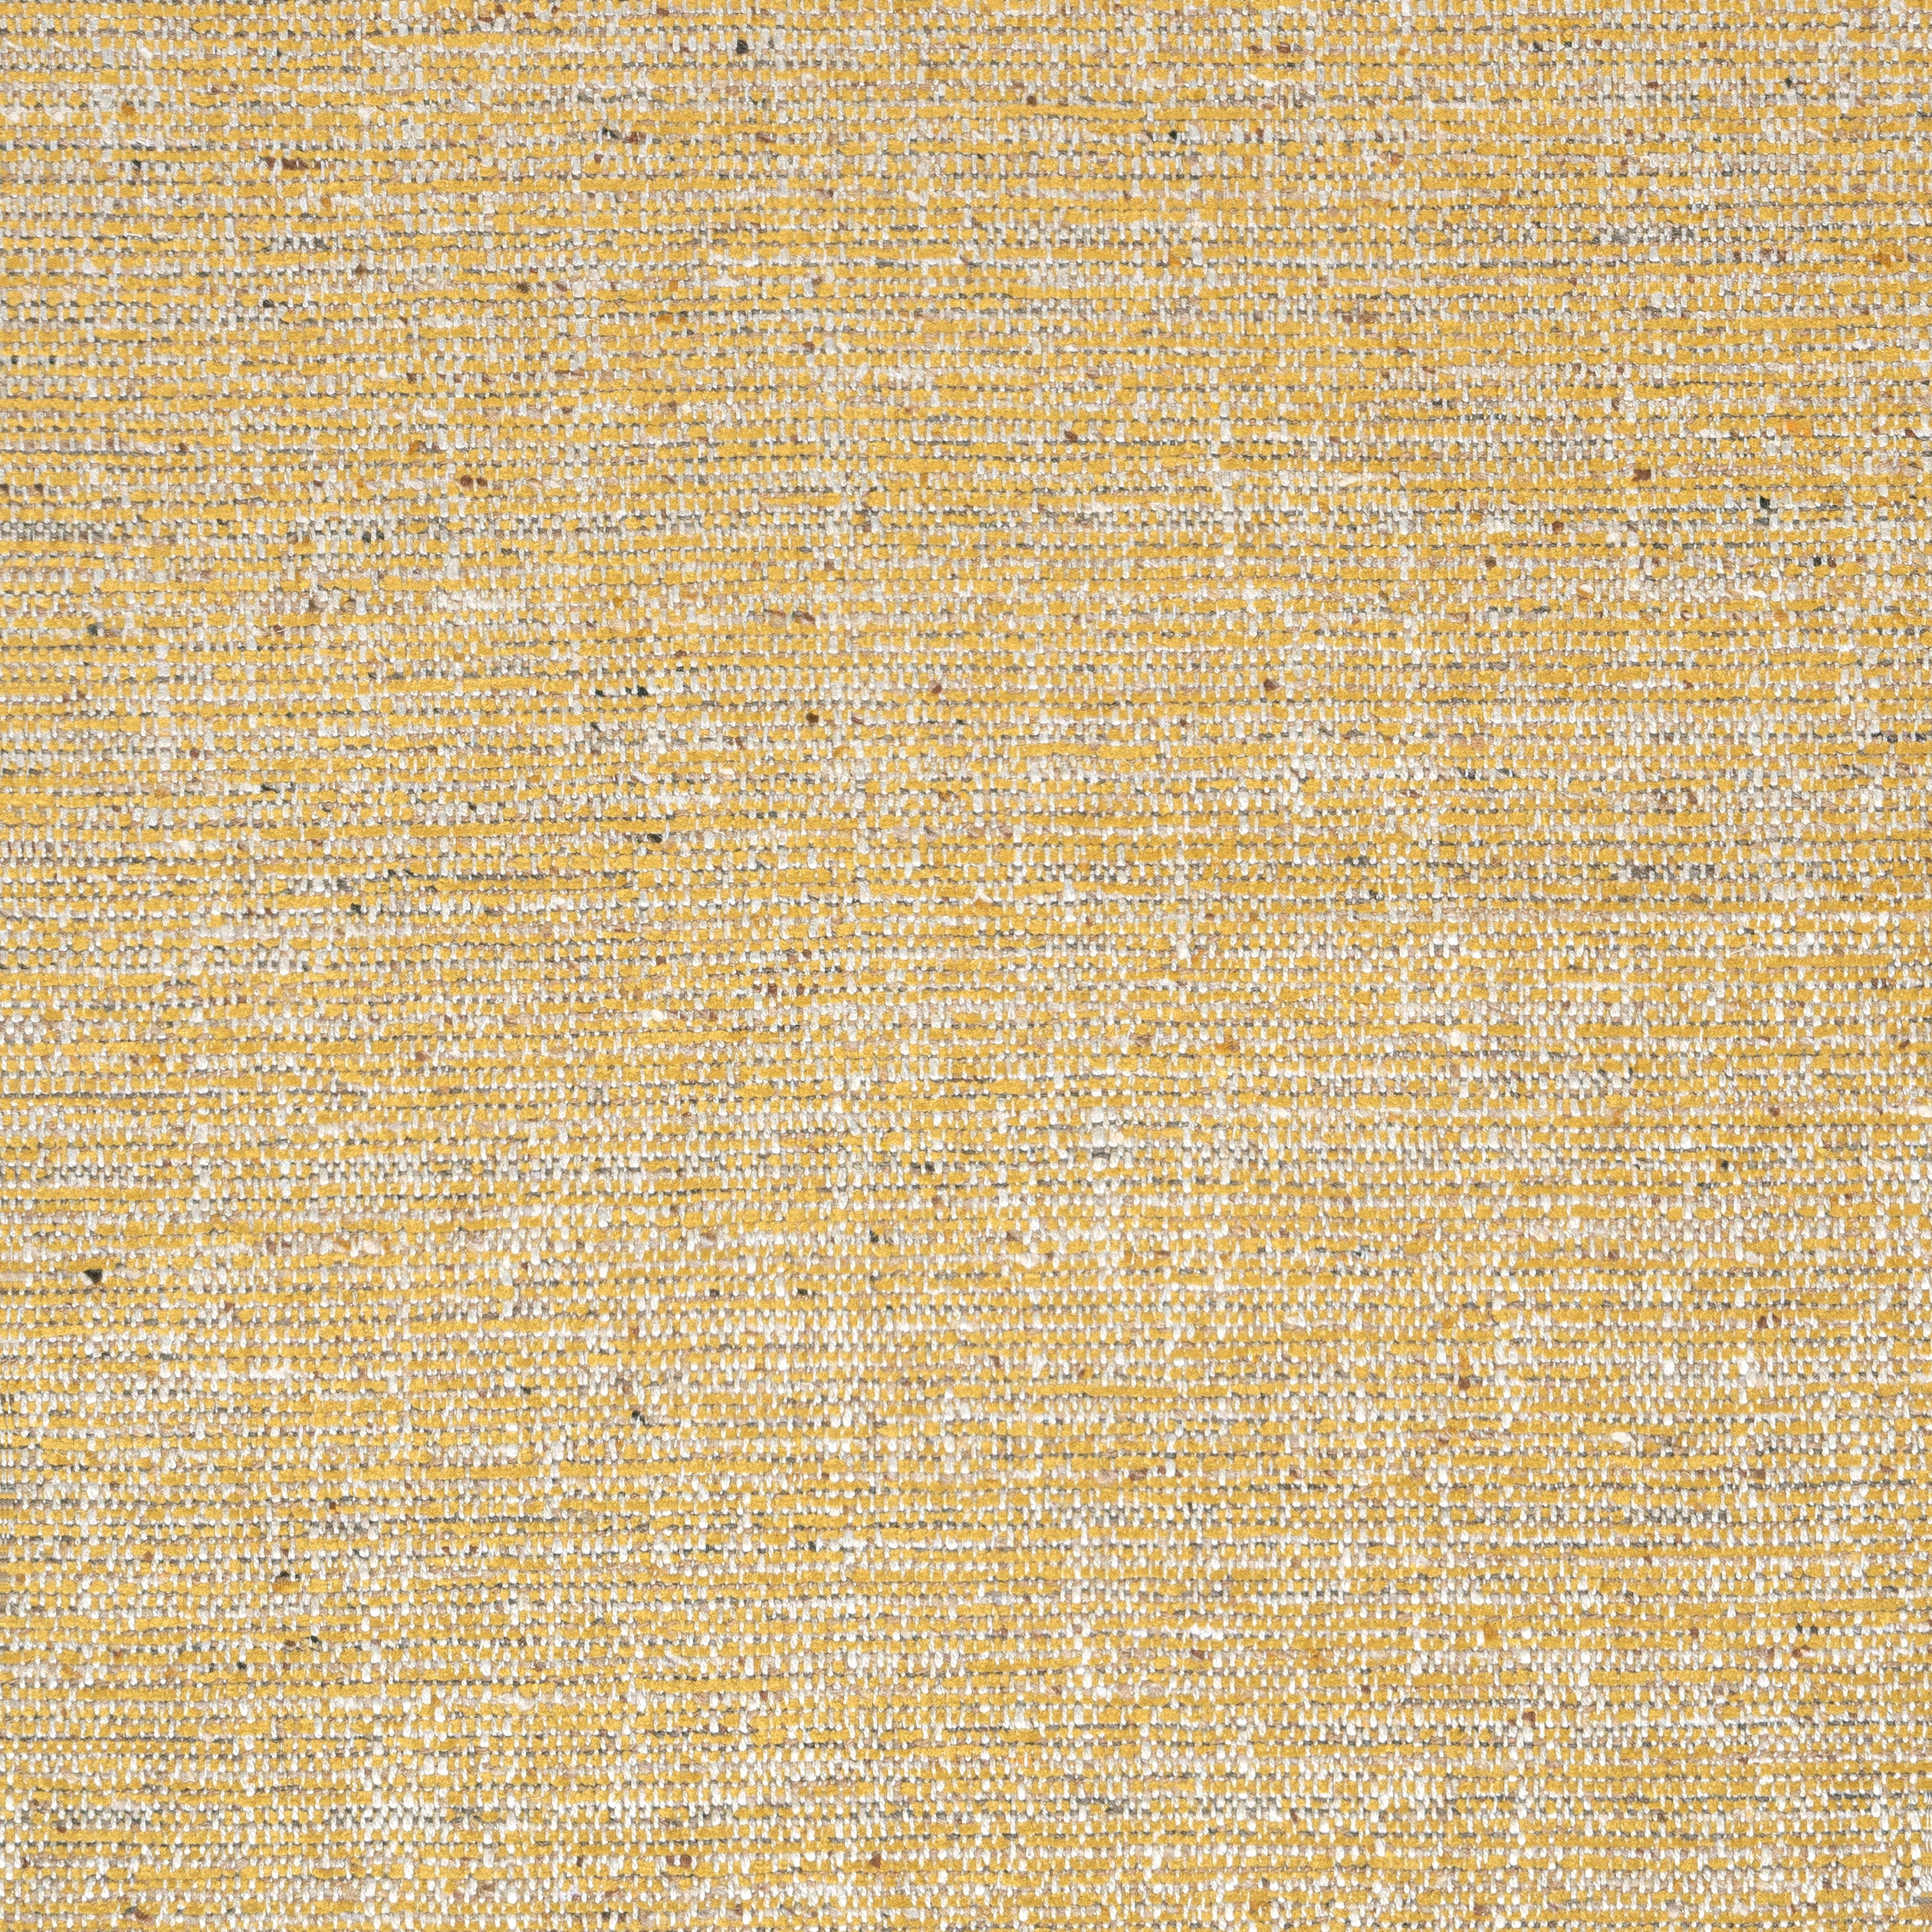 Elgin fabric in dijon color - pattern number W80943 - by Thibaut in the Dunmore collection